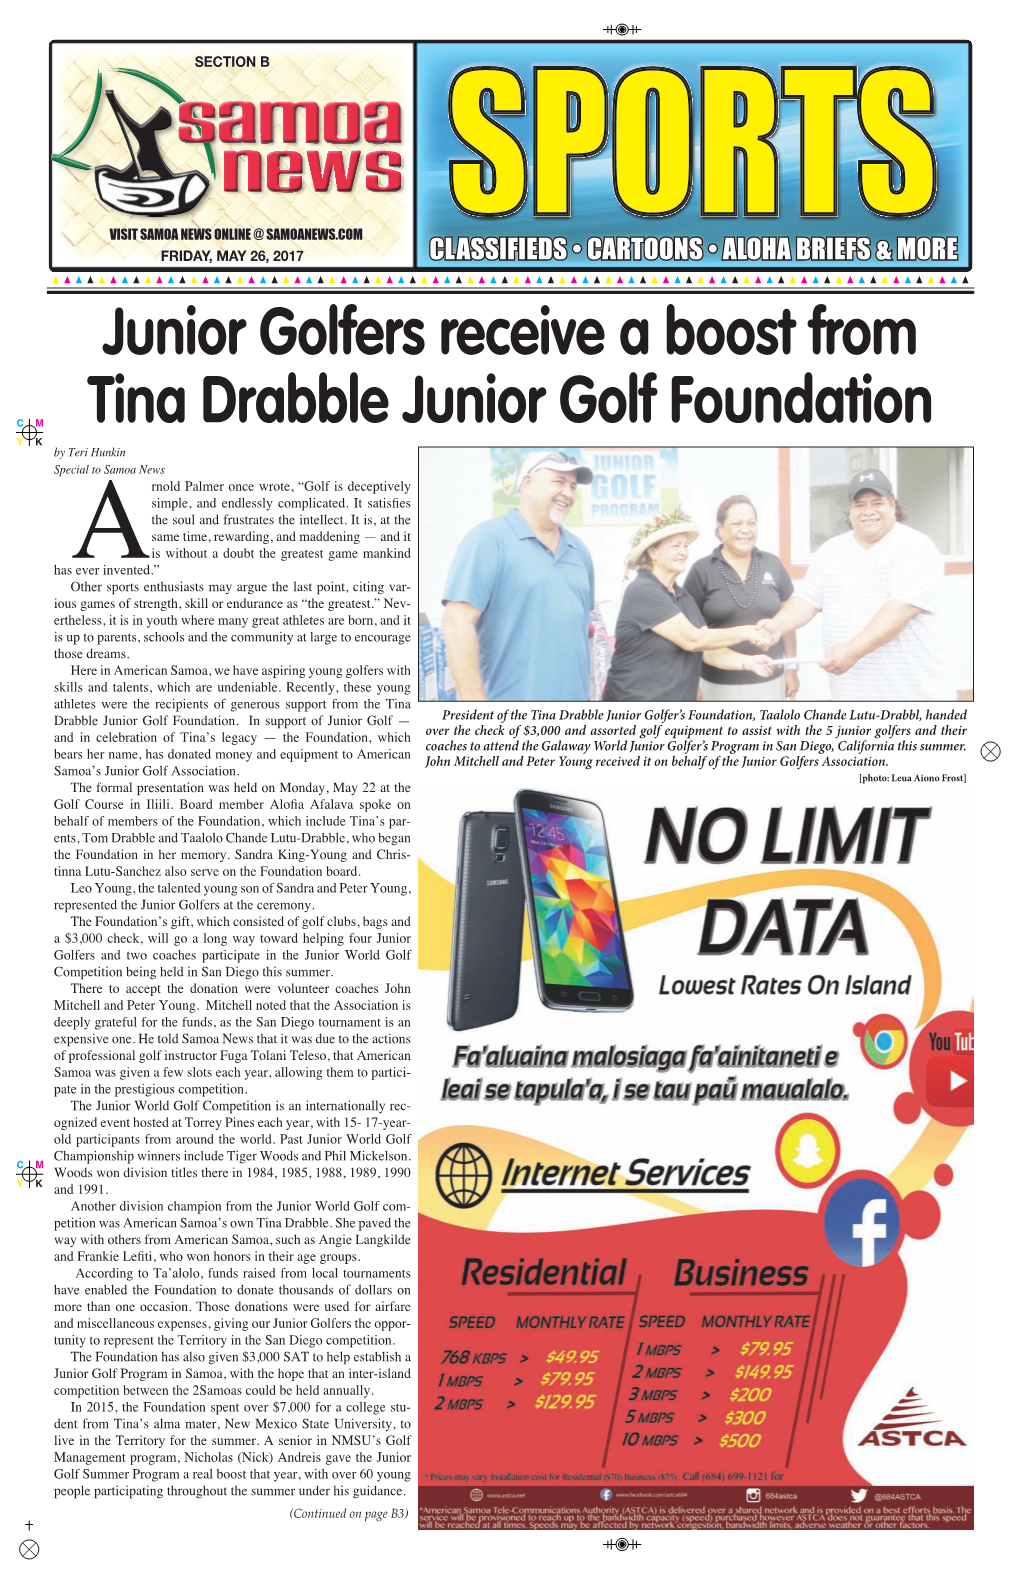 Junior Golfers Receive a Boost from Tina Drabble Junior Golf Foundation